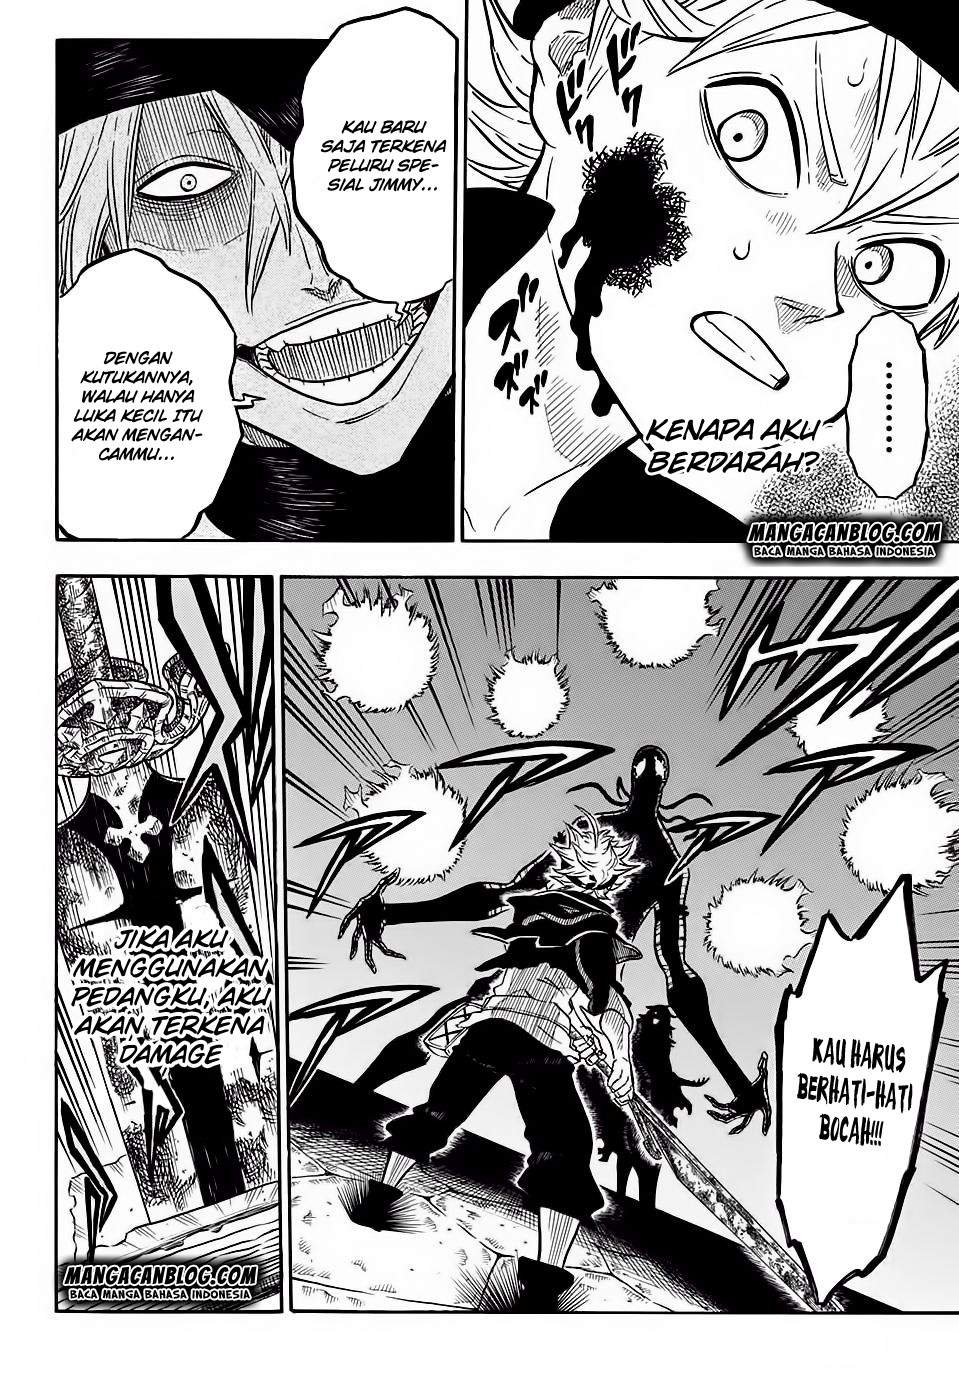 Black Clover Chapter 27 Bahasa Indonesia